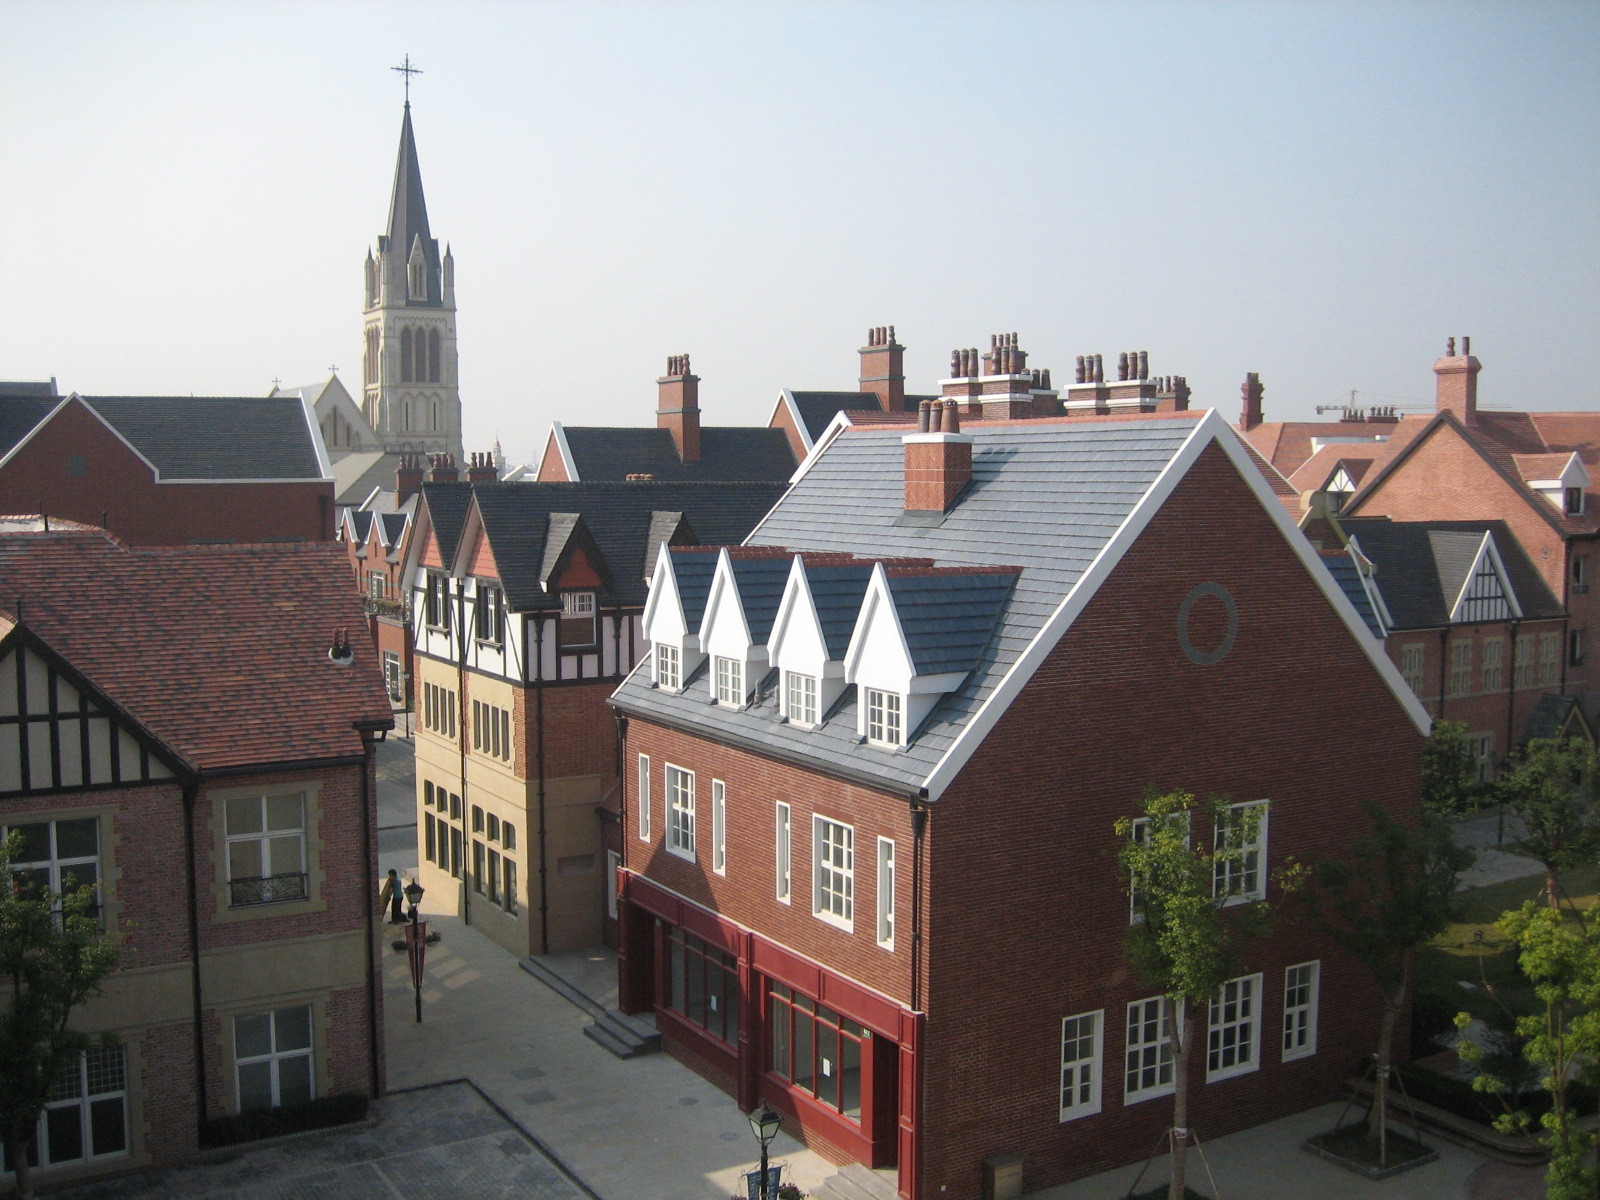 buildings with a spire on top and tall towers